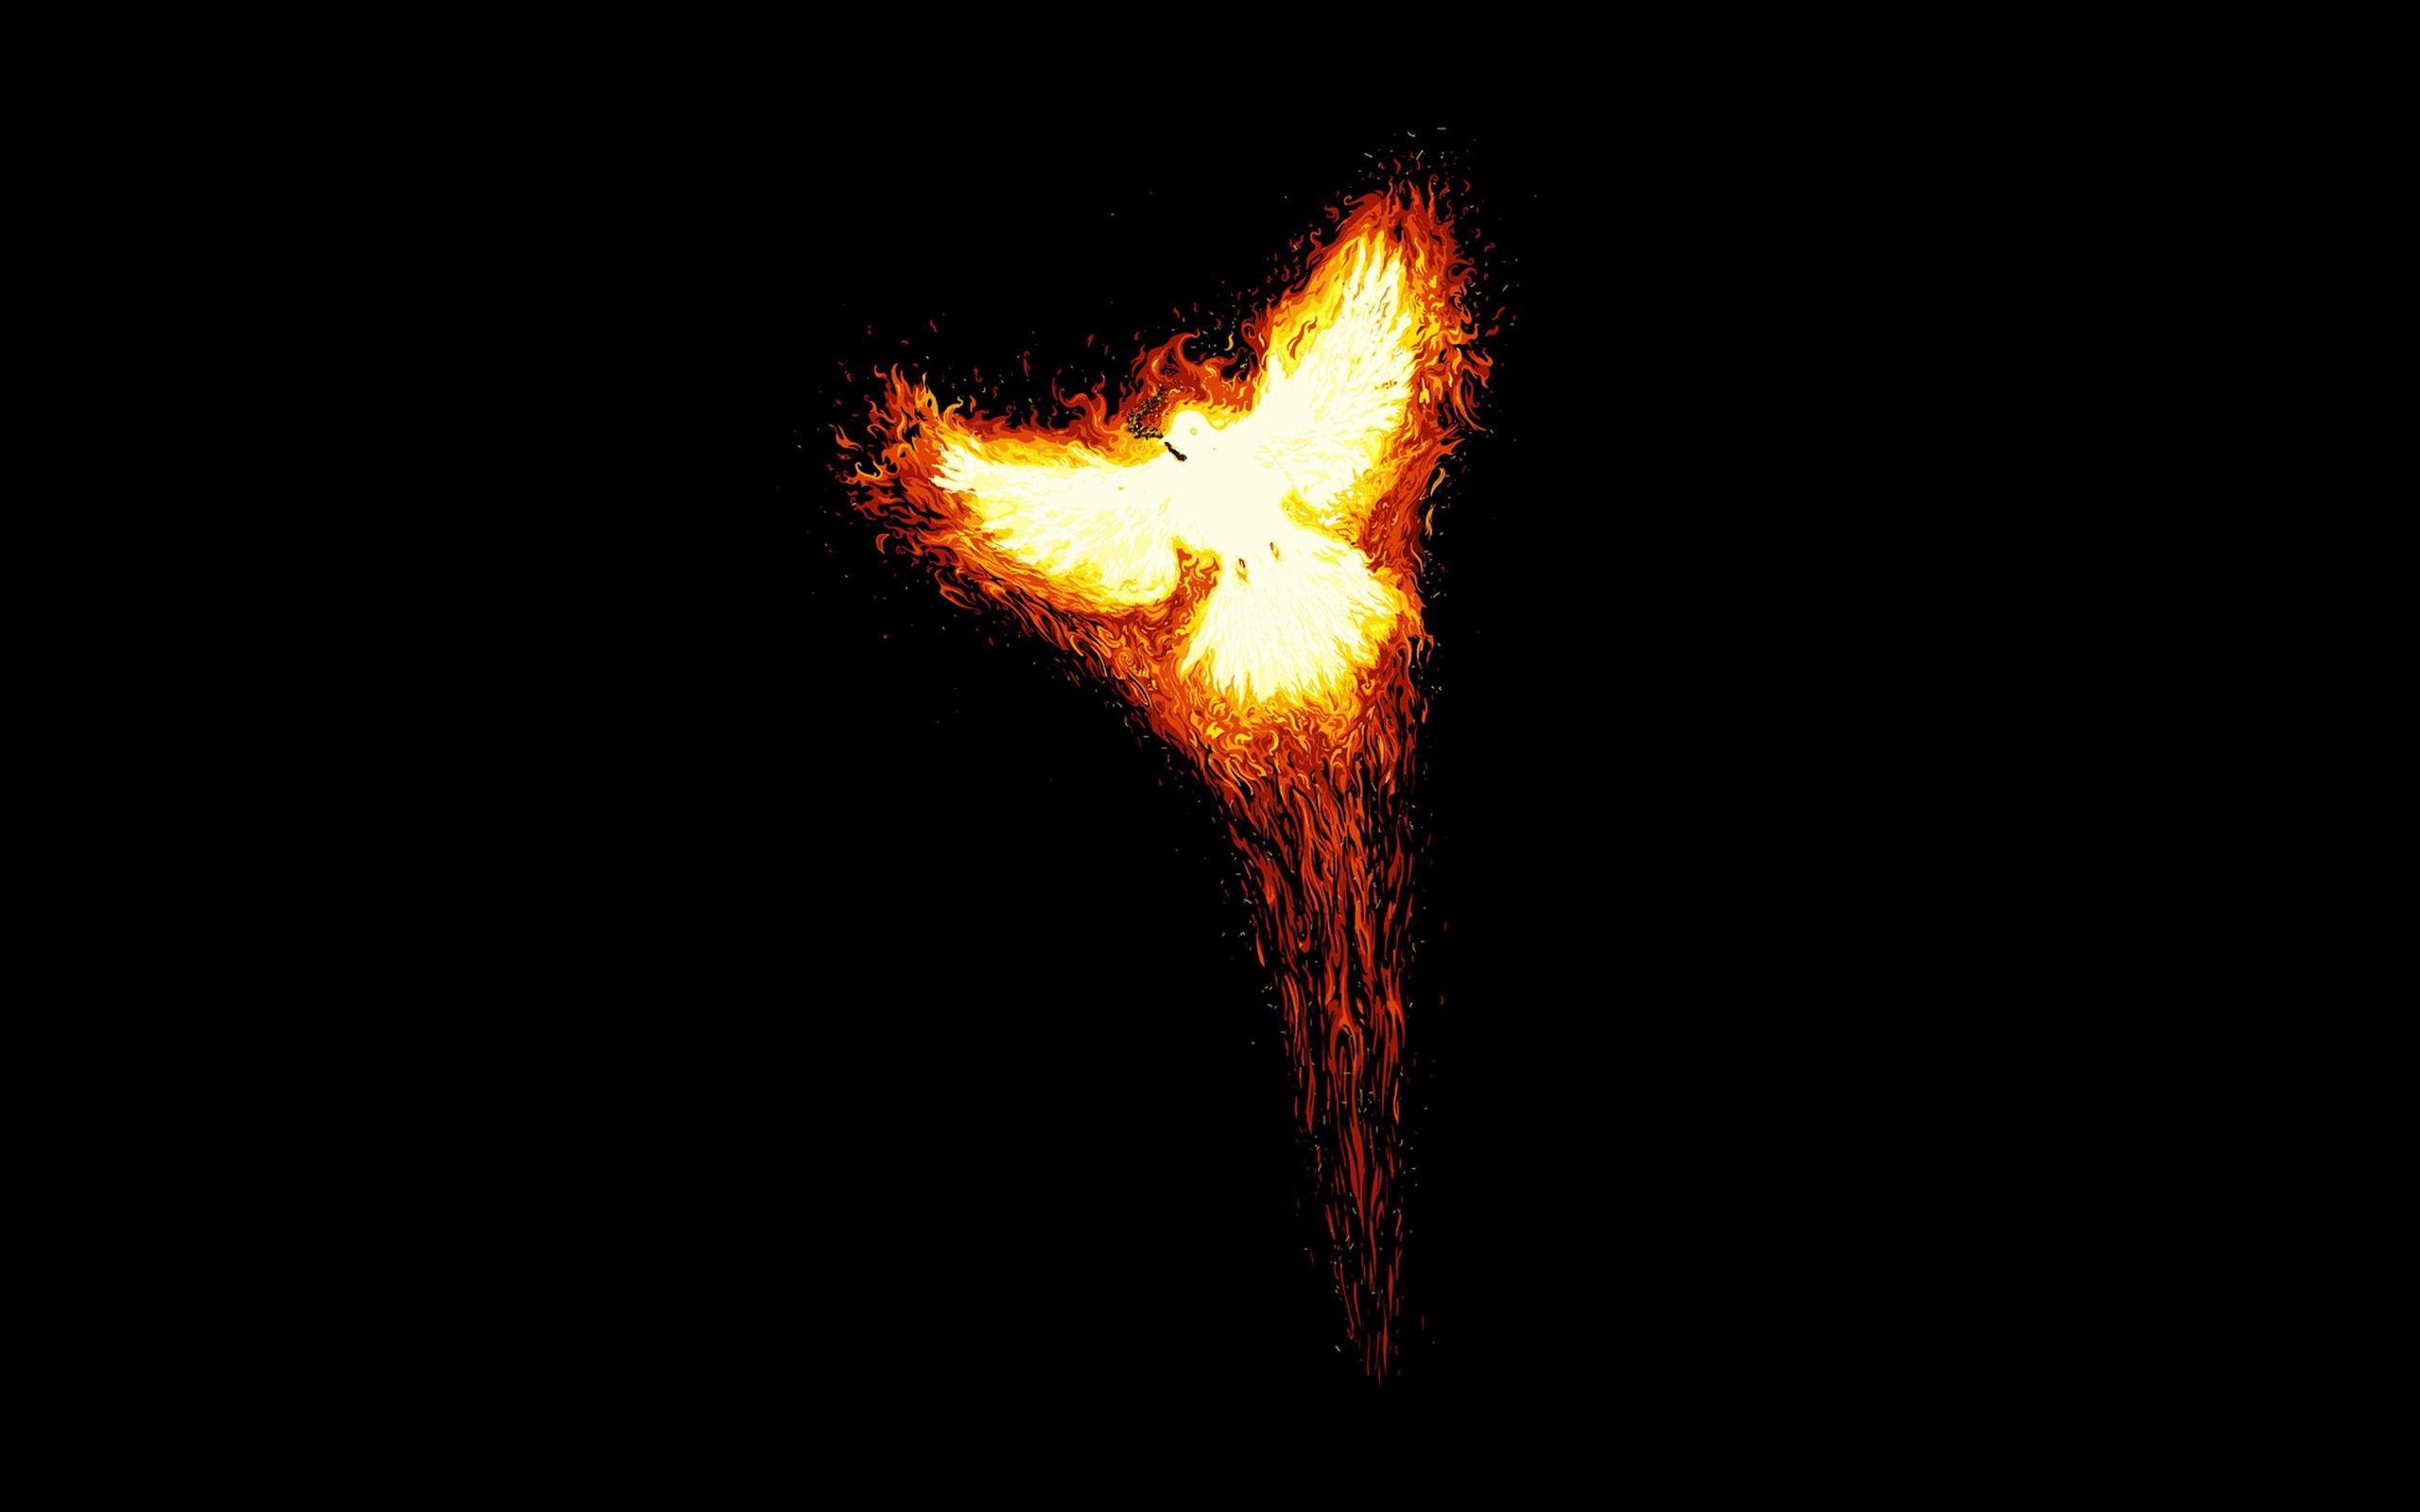 94691 download wallpaper fire, abstract, bird, minimalism, takeoff, phoenix, myth screensavers and pictures for free